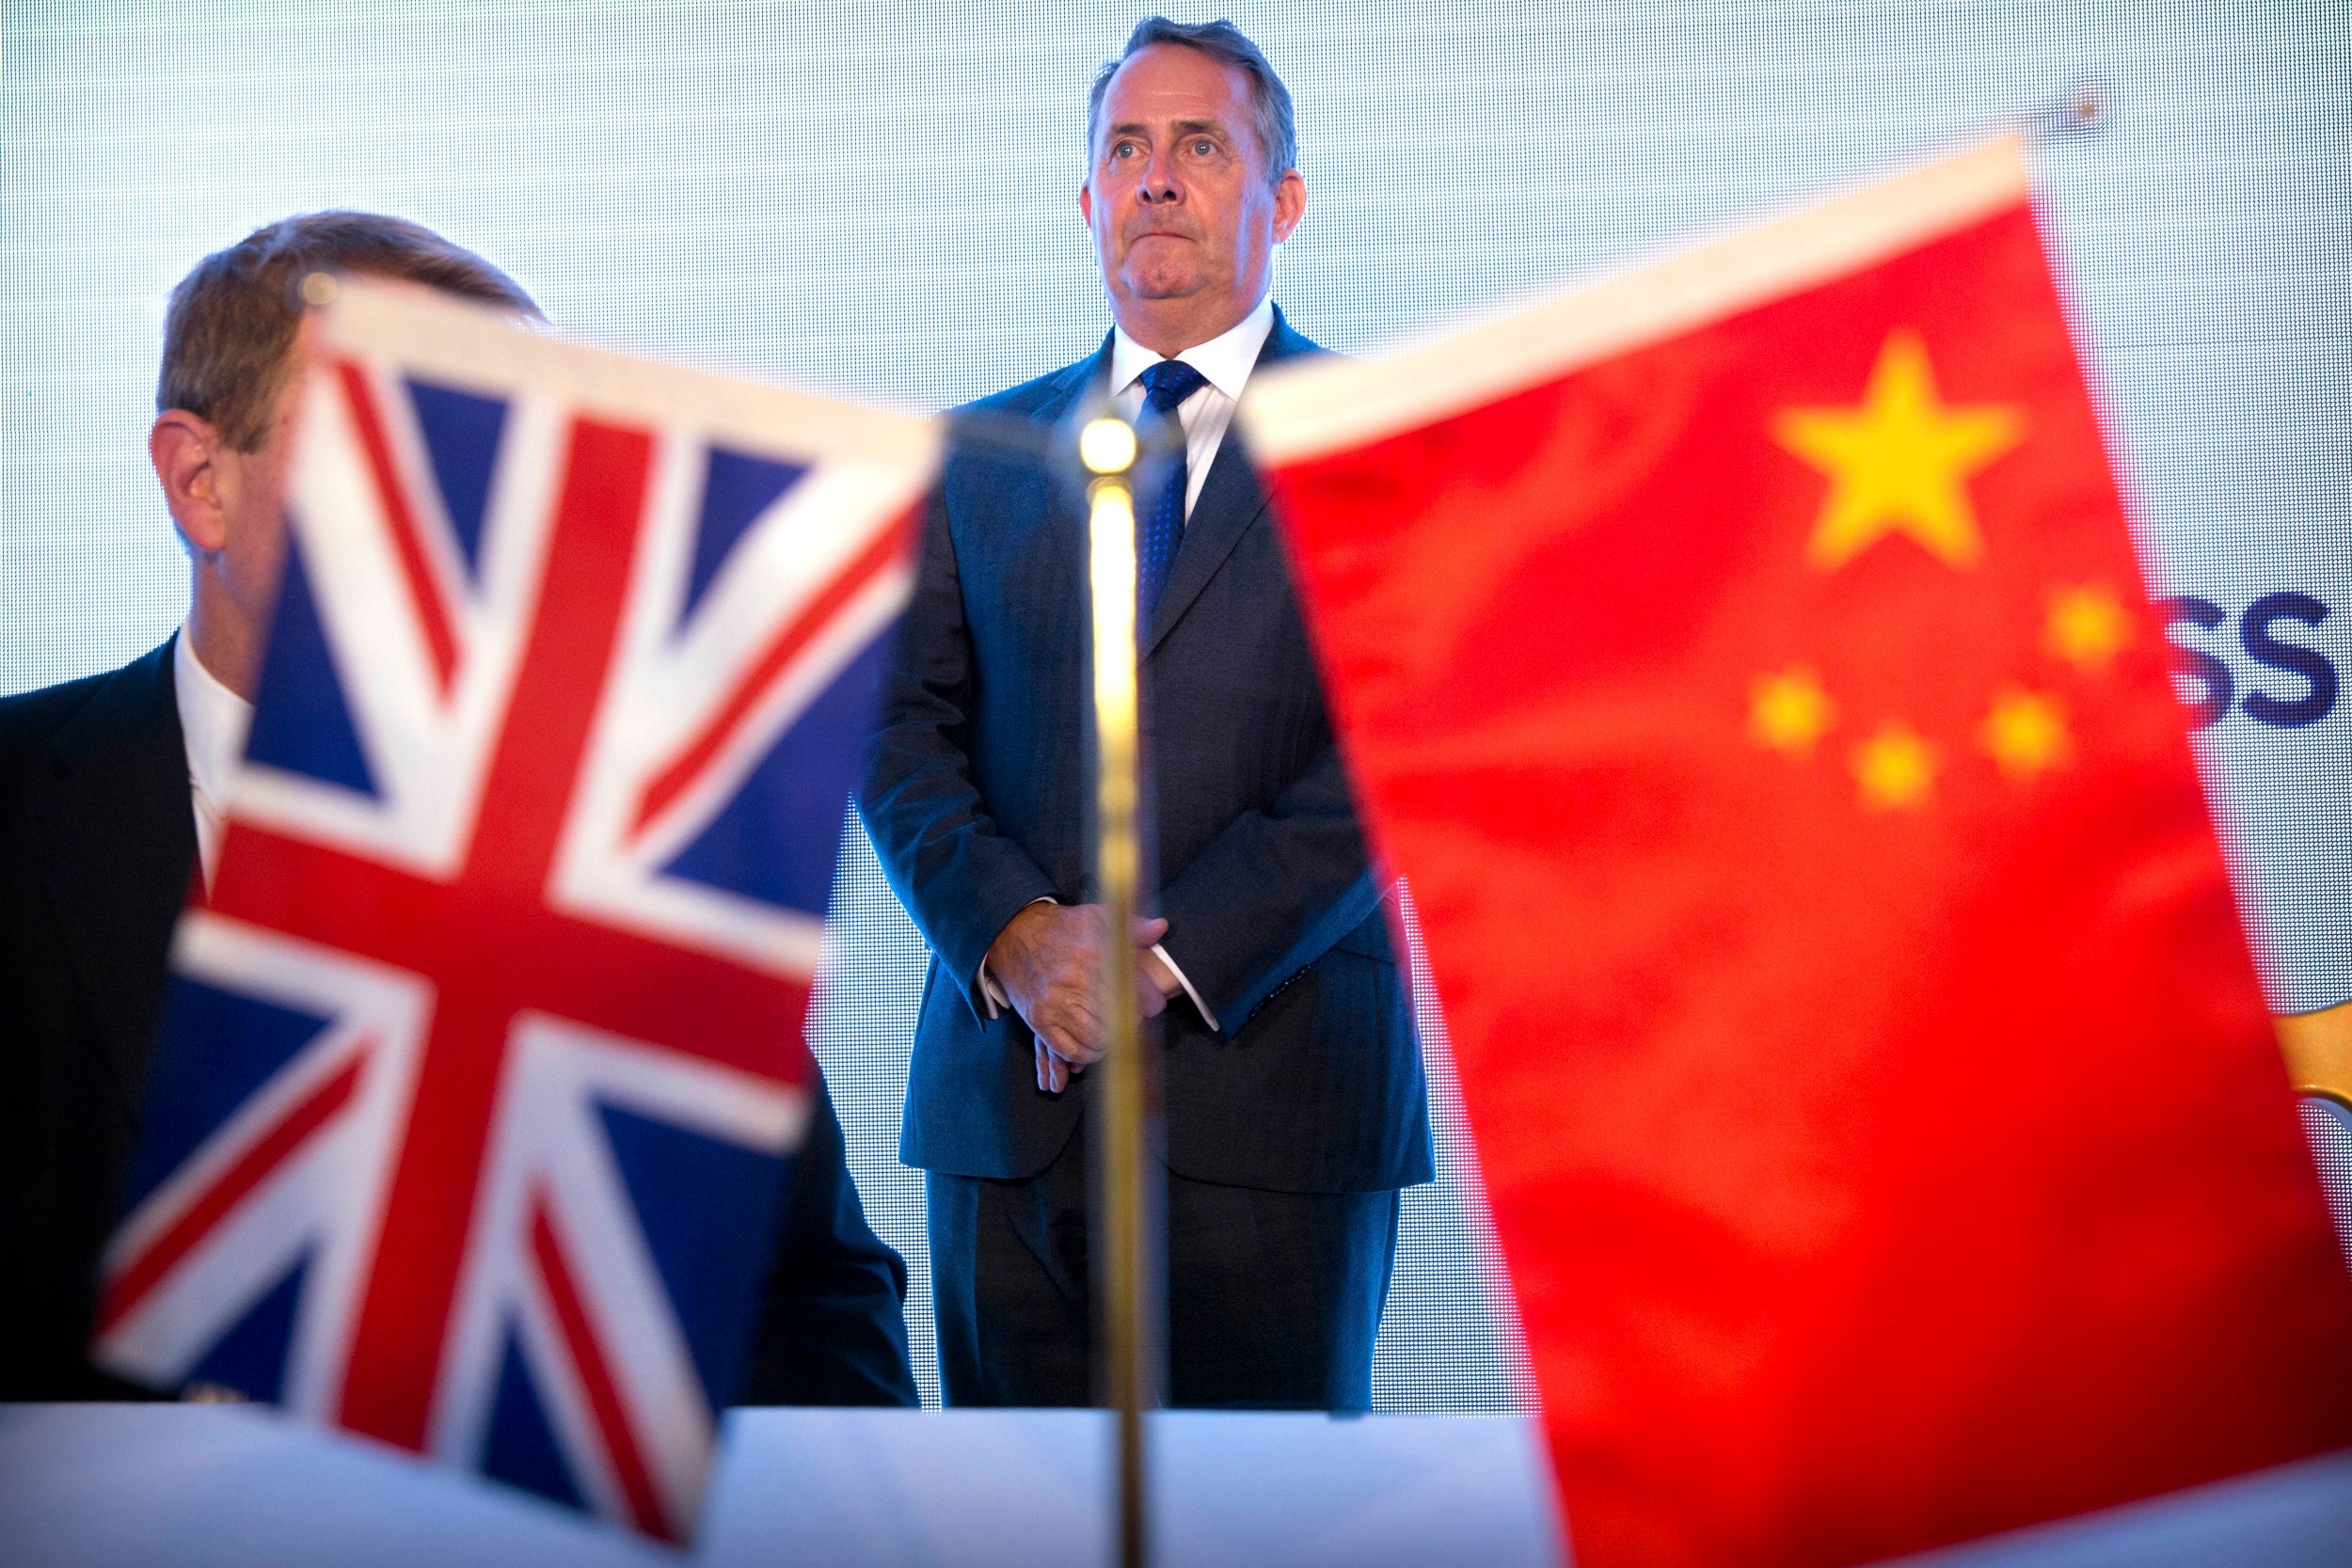 Liam Fox attends a ceremony in Beijing on Friday